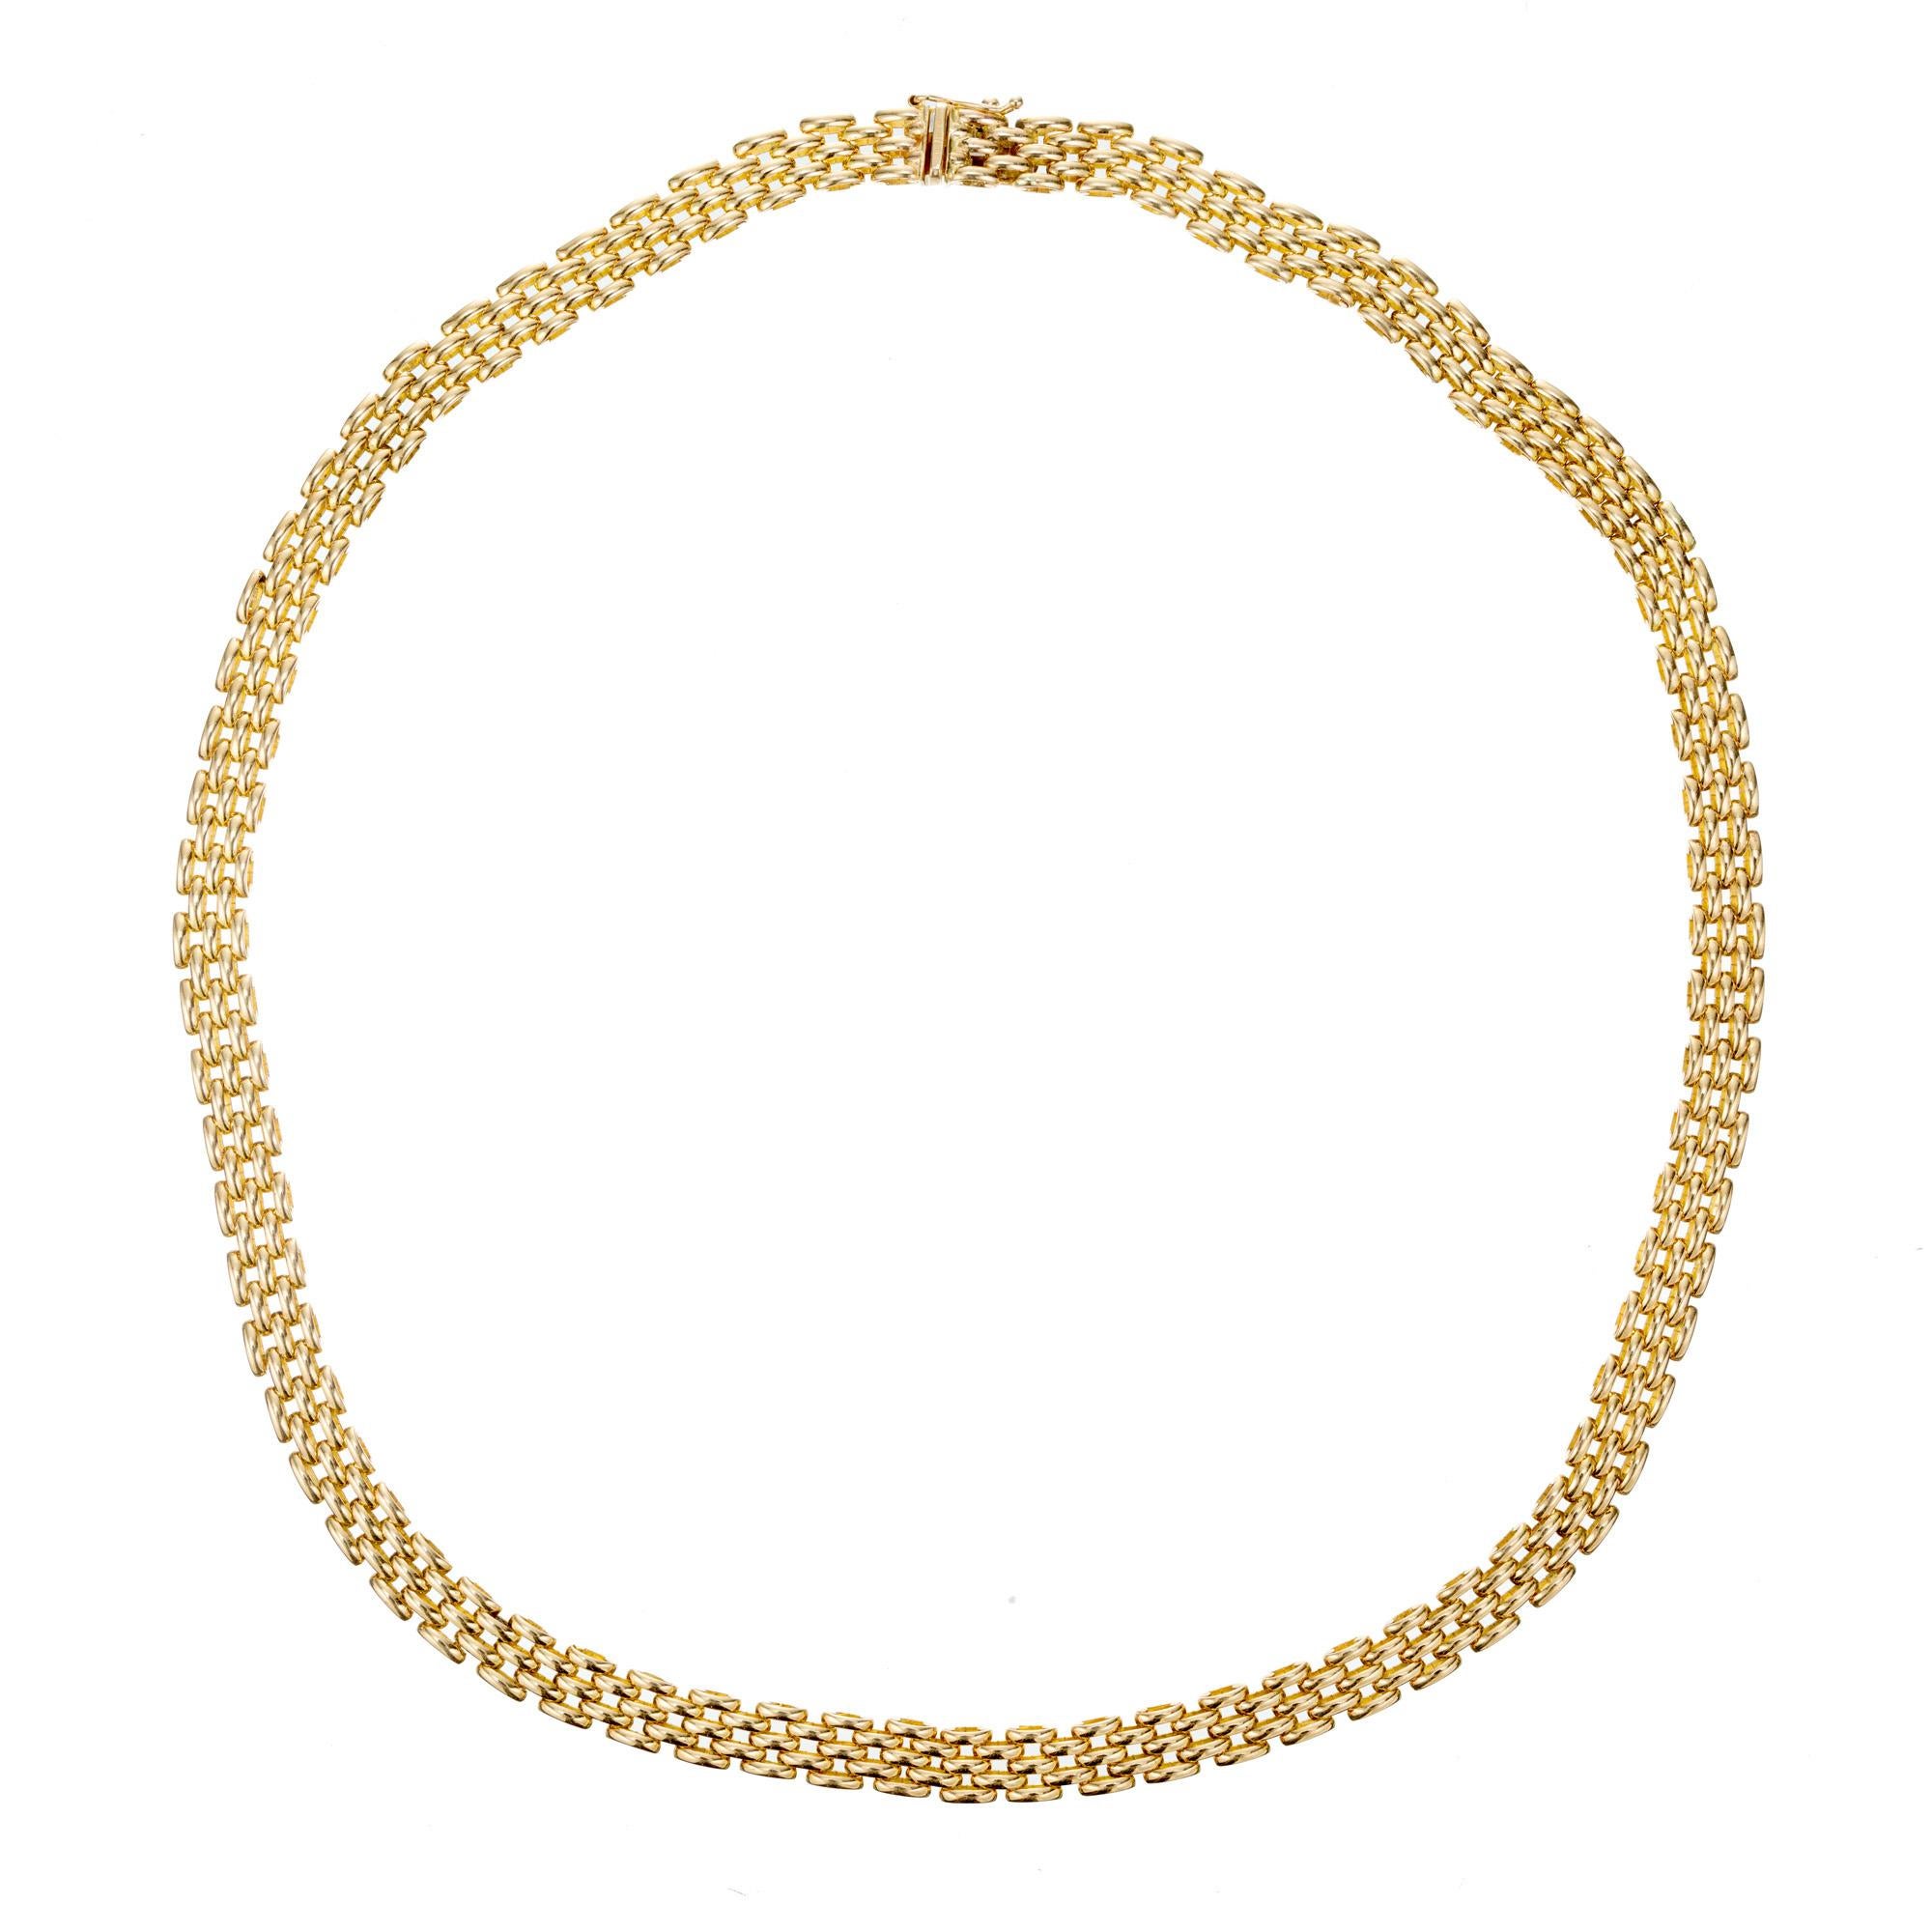 Italian Panther link necklace in 14k yellow gold. 19 inches in length.  

14k yellow gold 
Stamped: 14k 585
39.8 grams
Chain: 19 Inches
Total length: 19 Inches
Width: 7mm 
Thickness/depth:2.7mm
